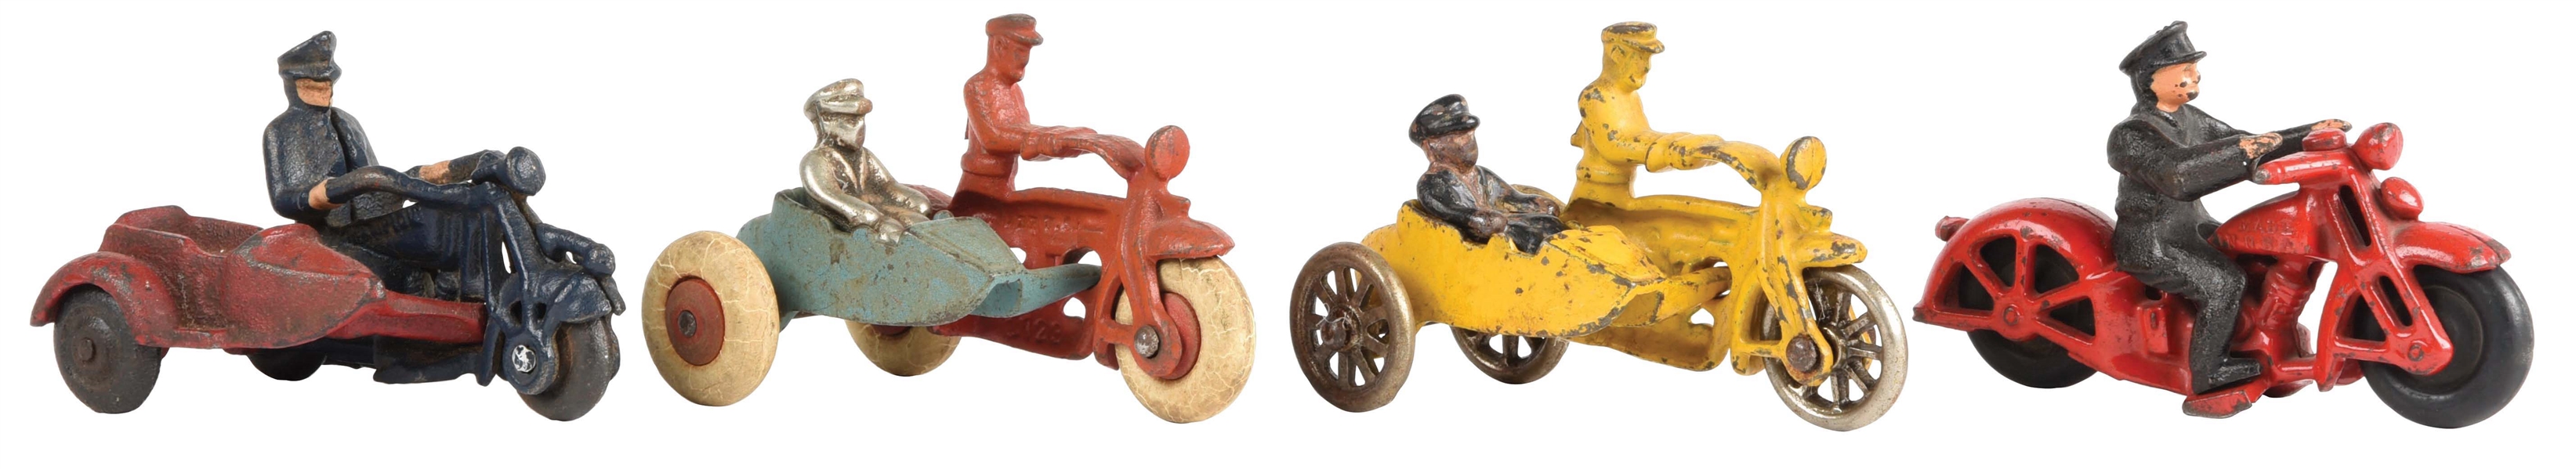 LOT OF 4: CAST-IRON AMERICAN MADE MOTORCYCLE TOYS.